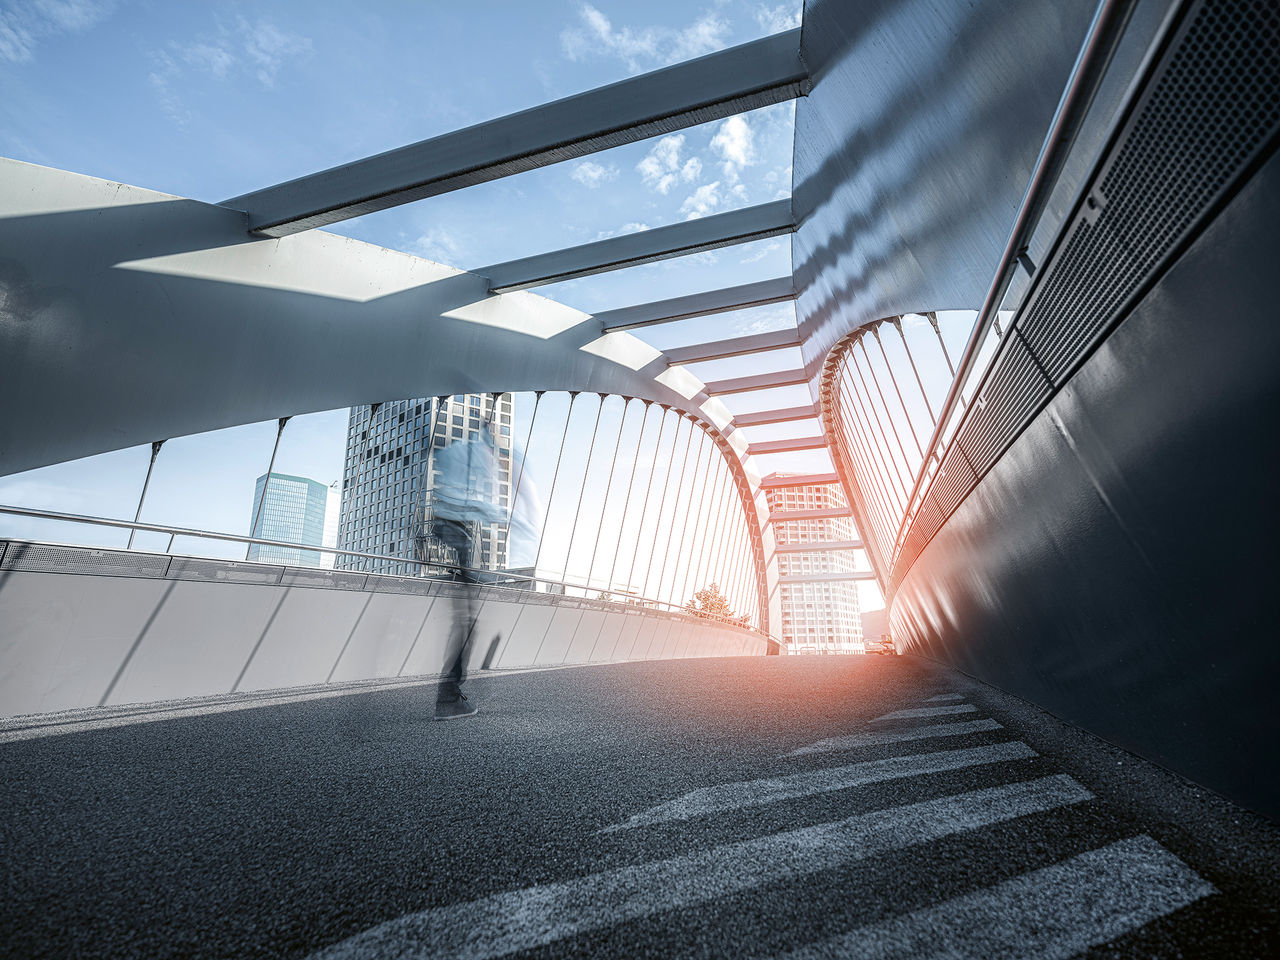 Key visual showing the bridge “Gleisbogen” in Zurich, Switzerland, with one person in movement. Edited with brand fresh-up filter and magic light effect.